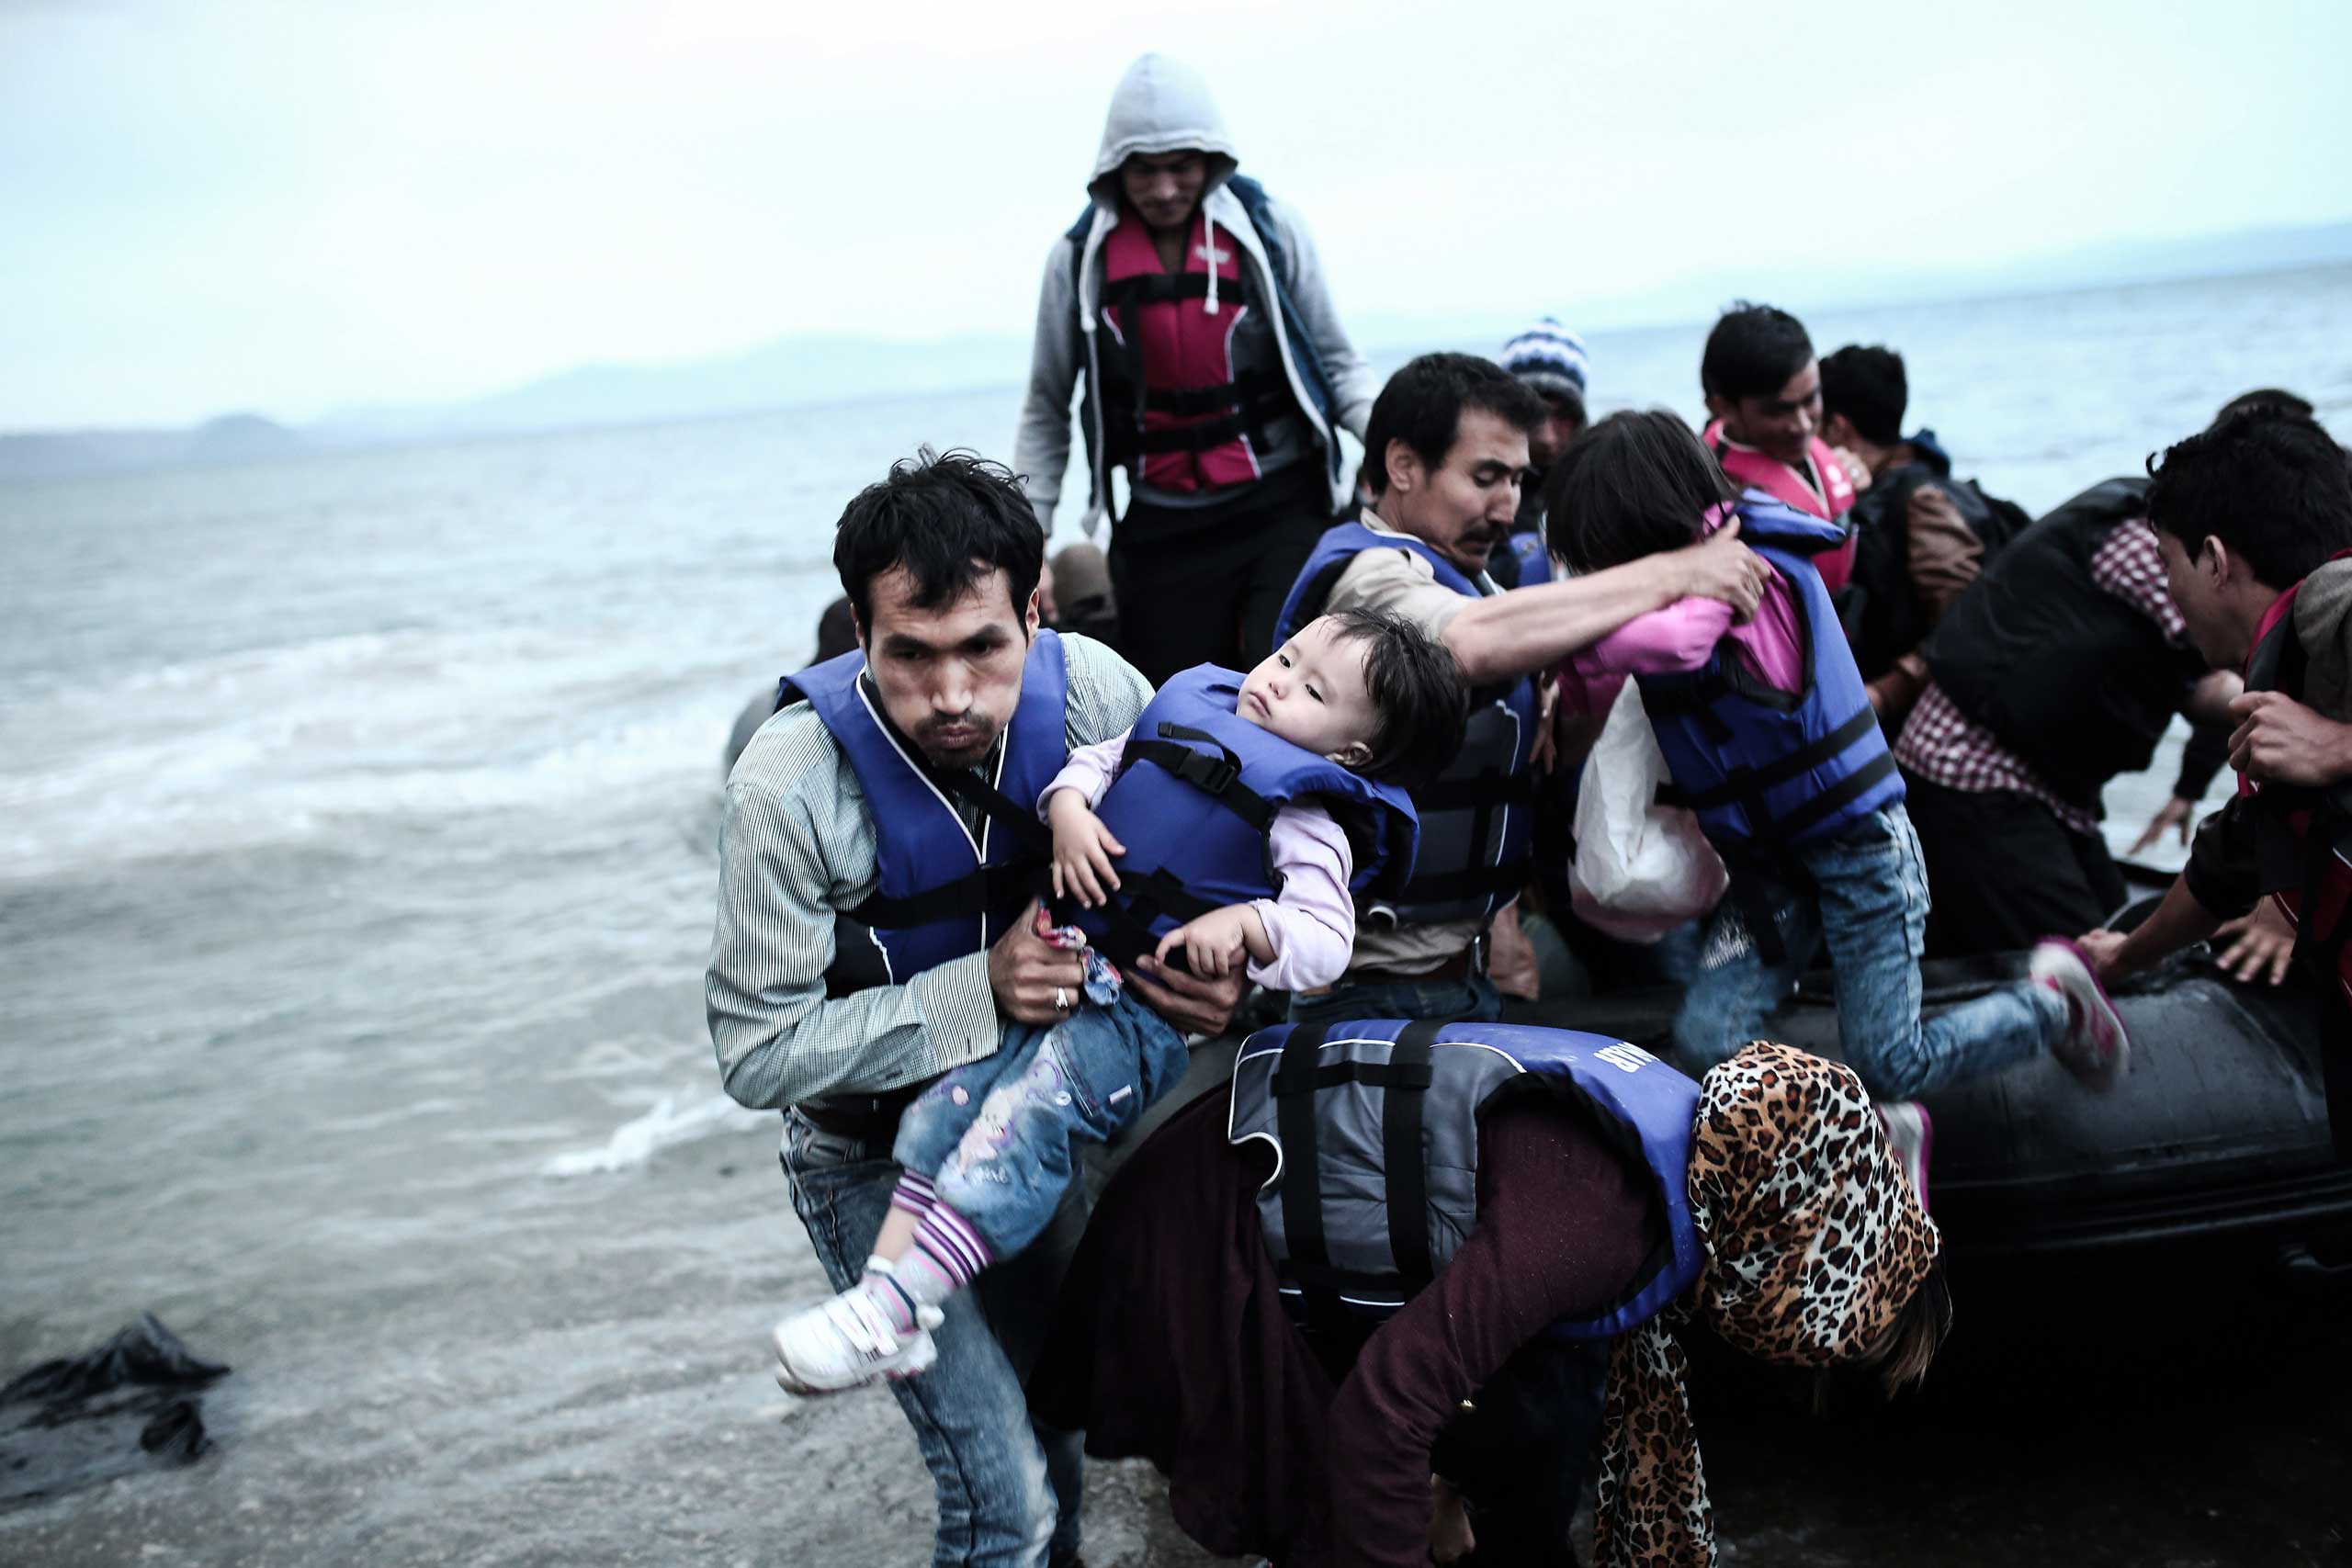 Afghan migrants arrive on a beach on the Greek island of Kos, after crossing a part of the Aegean Sea between Turkey and Greece, May 27, 2015.